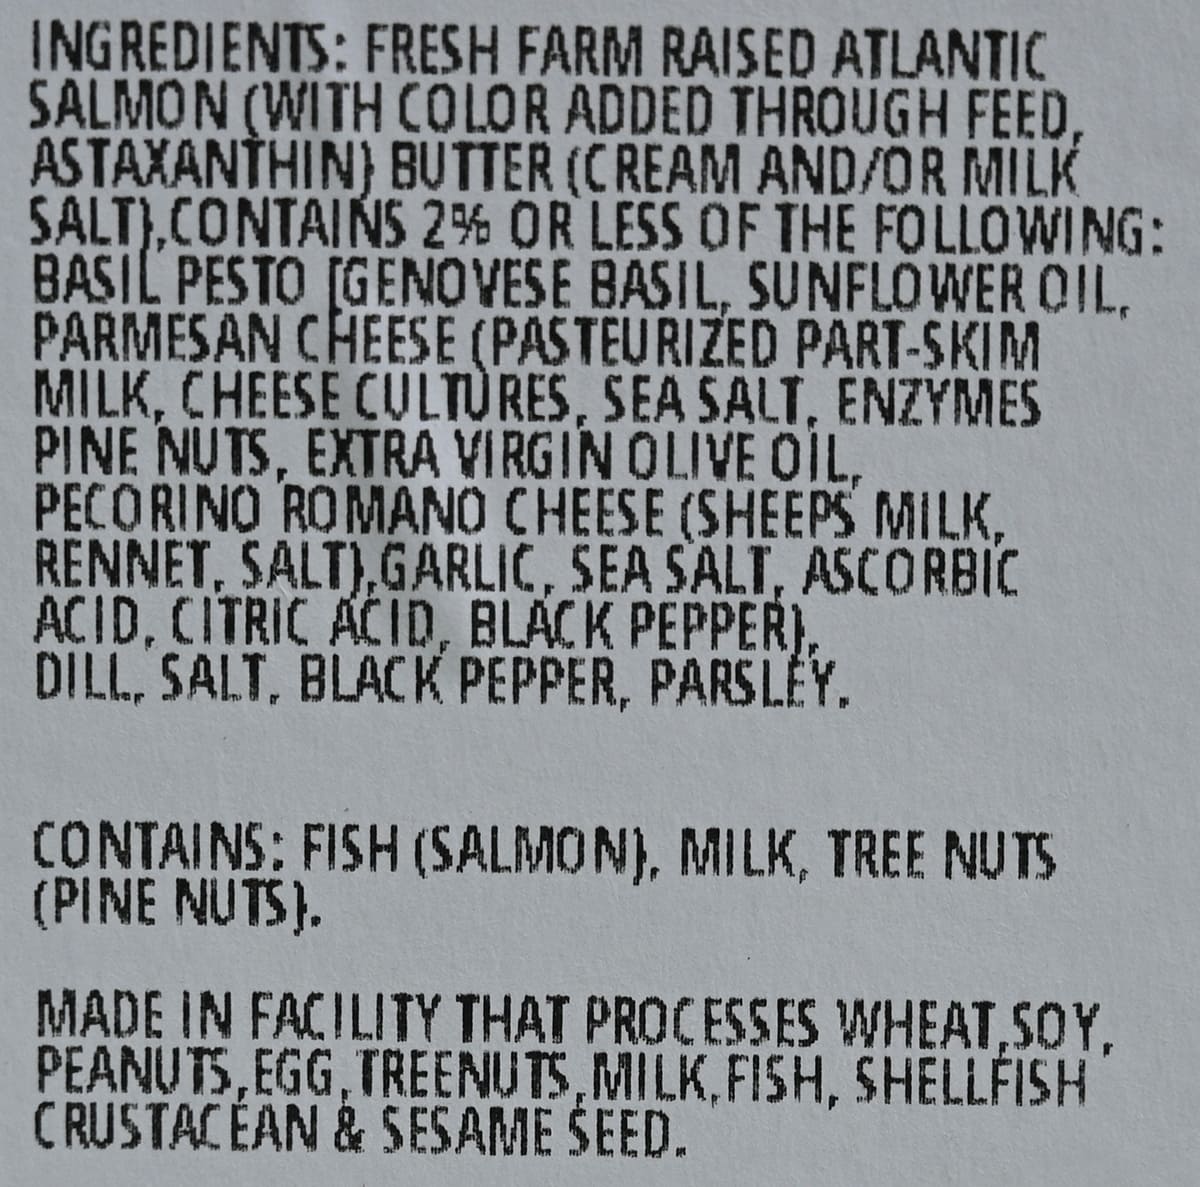 Image of the ingredients for the salmon from the label.